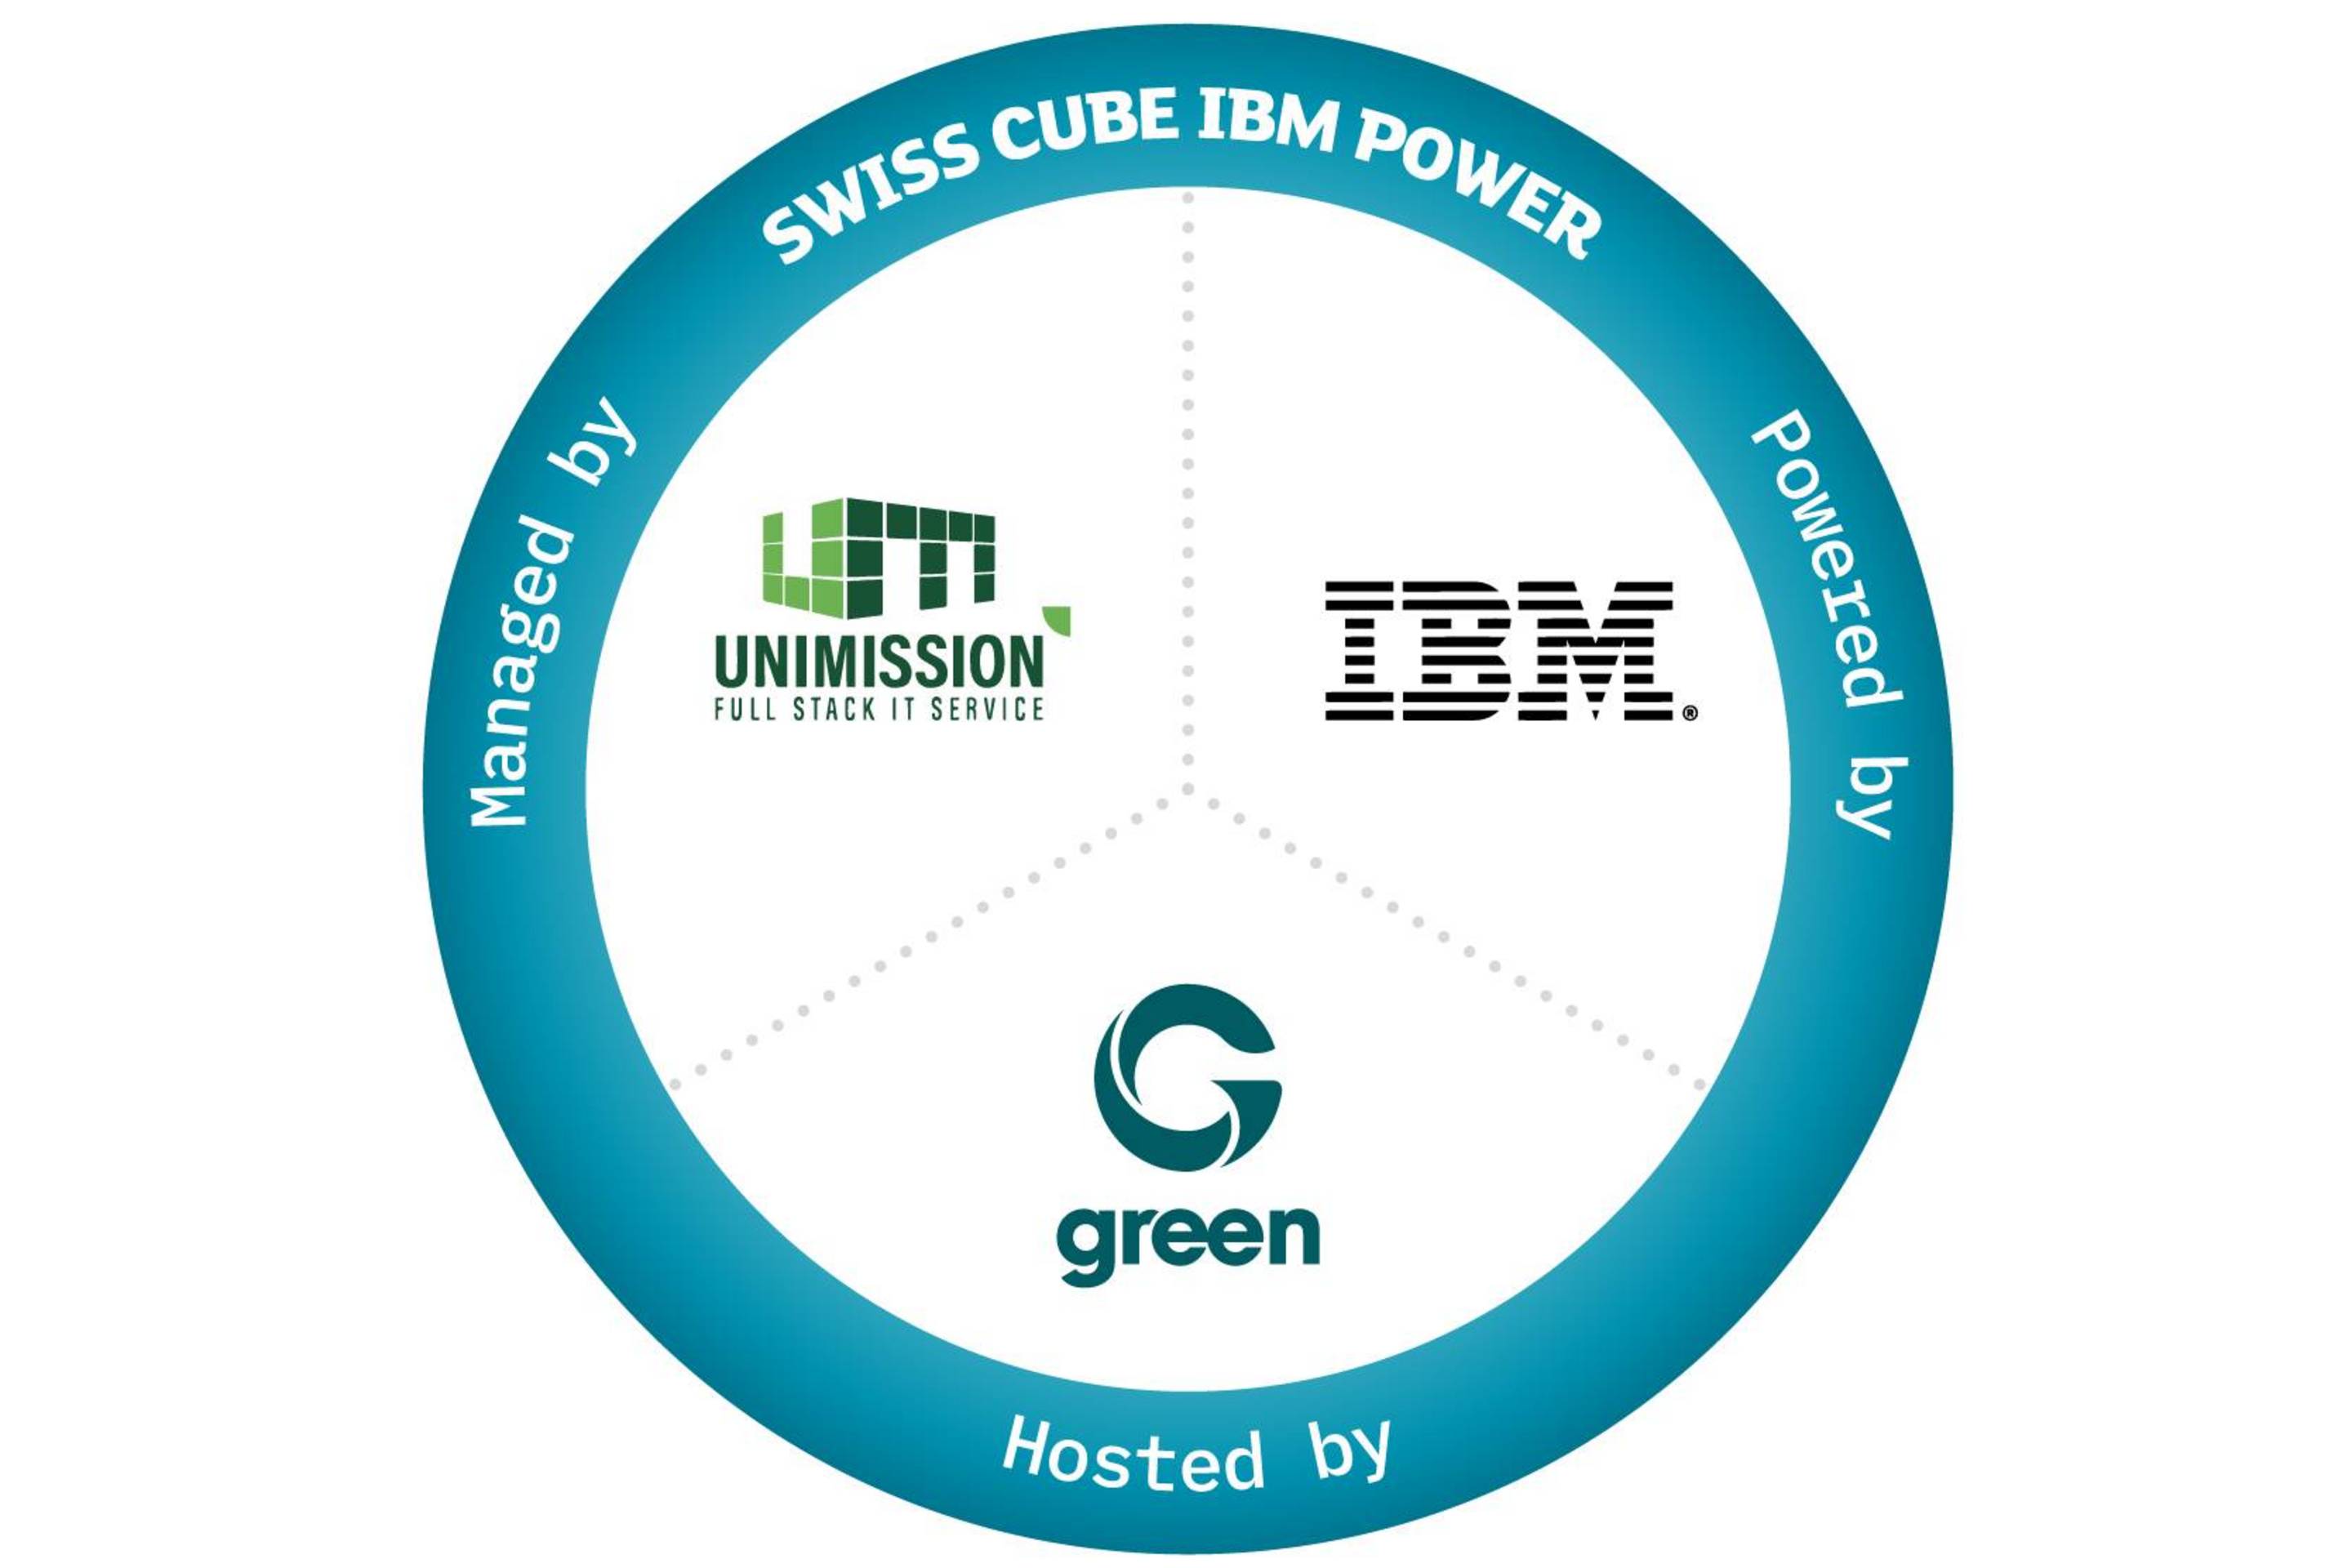 Swiss Cube IBM Power-Grafik: managed by Unimission, powered by IBM Power, hosted by Green